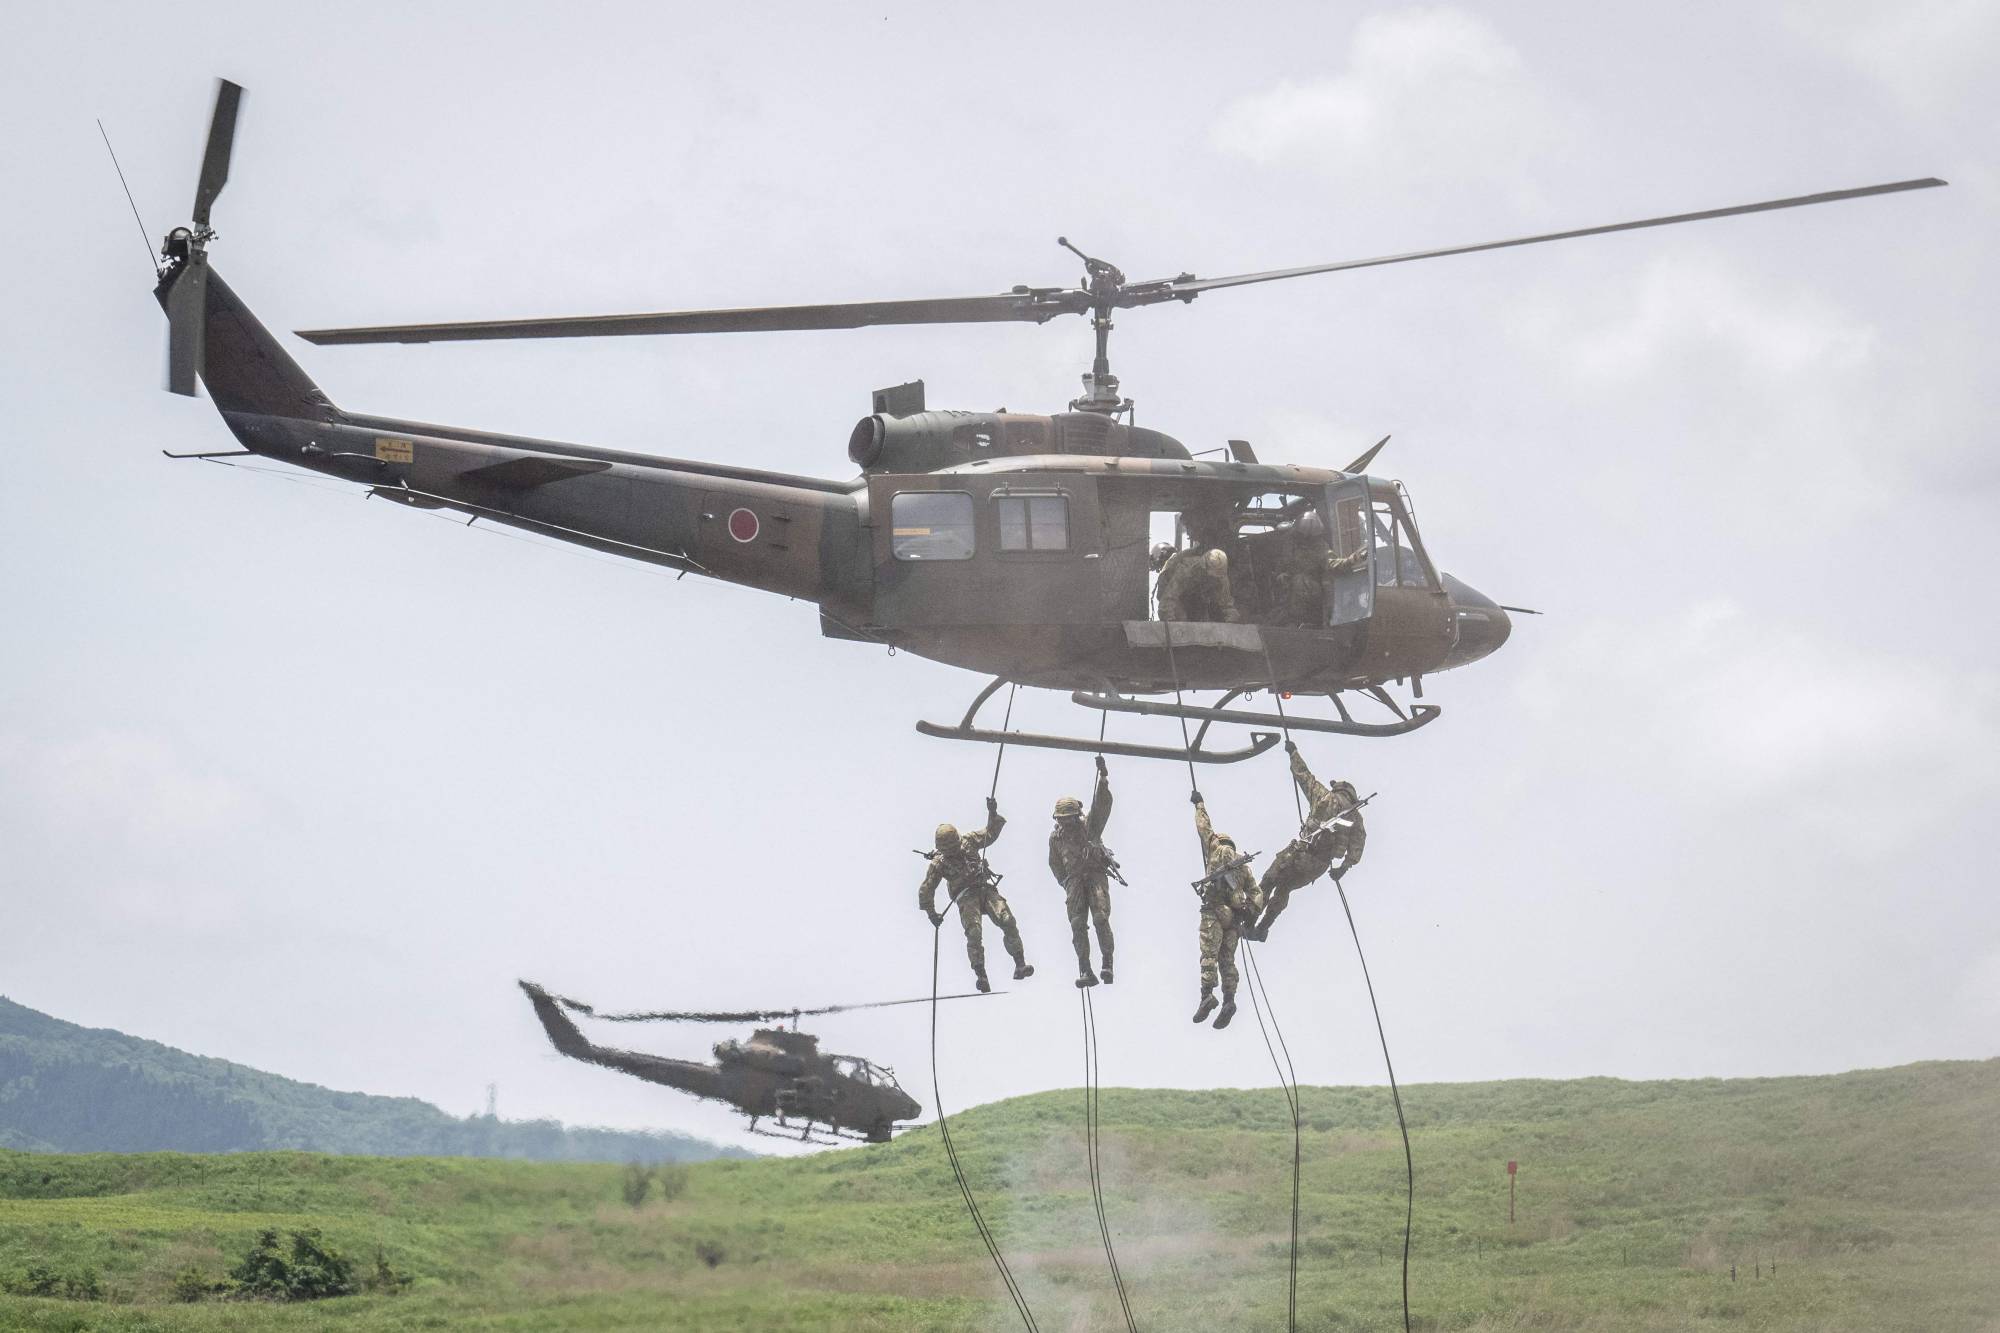 Ground Self-Defense Forces soldiers rappel from a helicopter during a live-fire exercise at the East Fuji Maneuver Area in Gotemba, Shizuoka Prefecture, on May 27. | AFP-JIJI